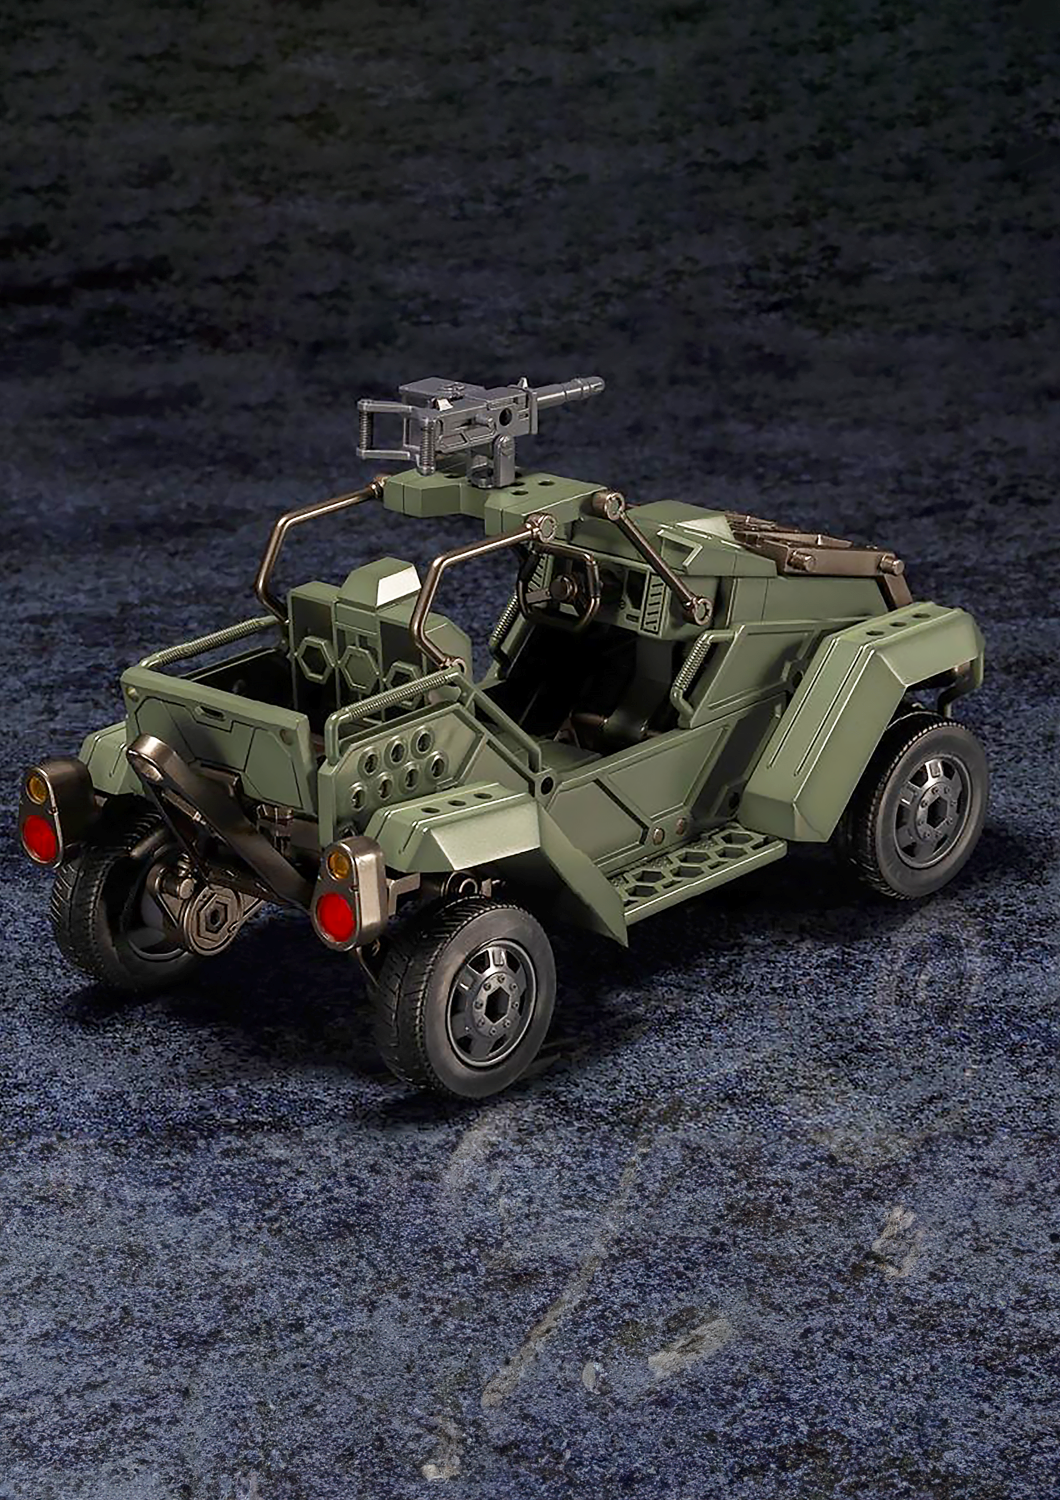 KOTOBUKIYA HEXA GEAR BOOSTER PACK 003 FOREST BUGGY 1/24 SCALE - HG037 - Anotoys Collectibles